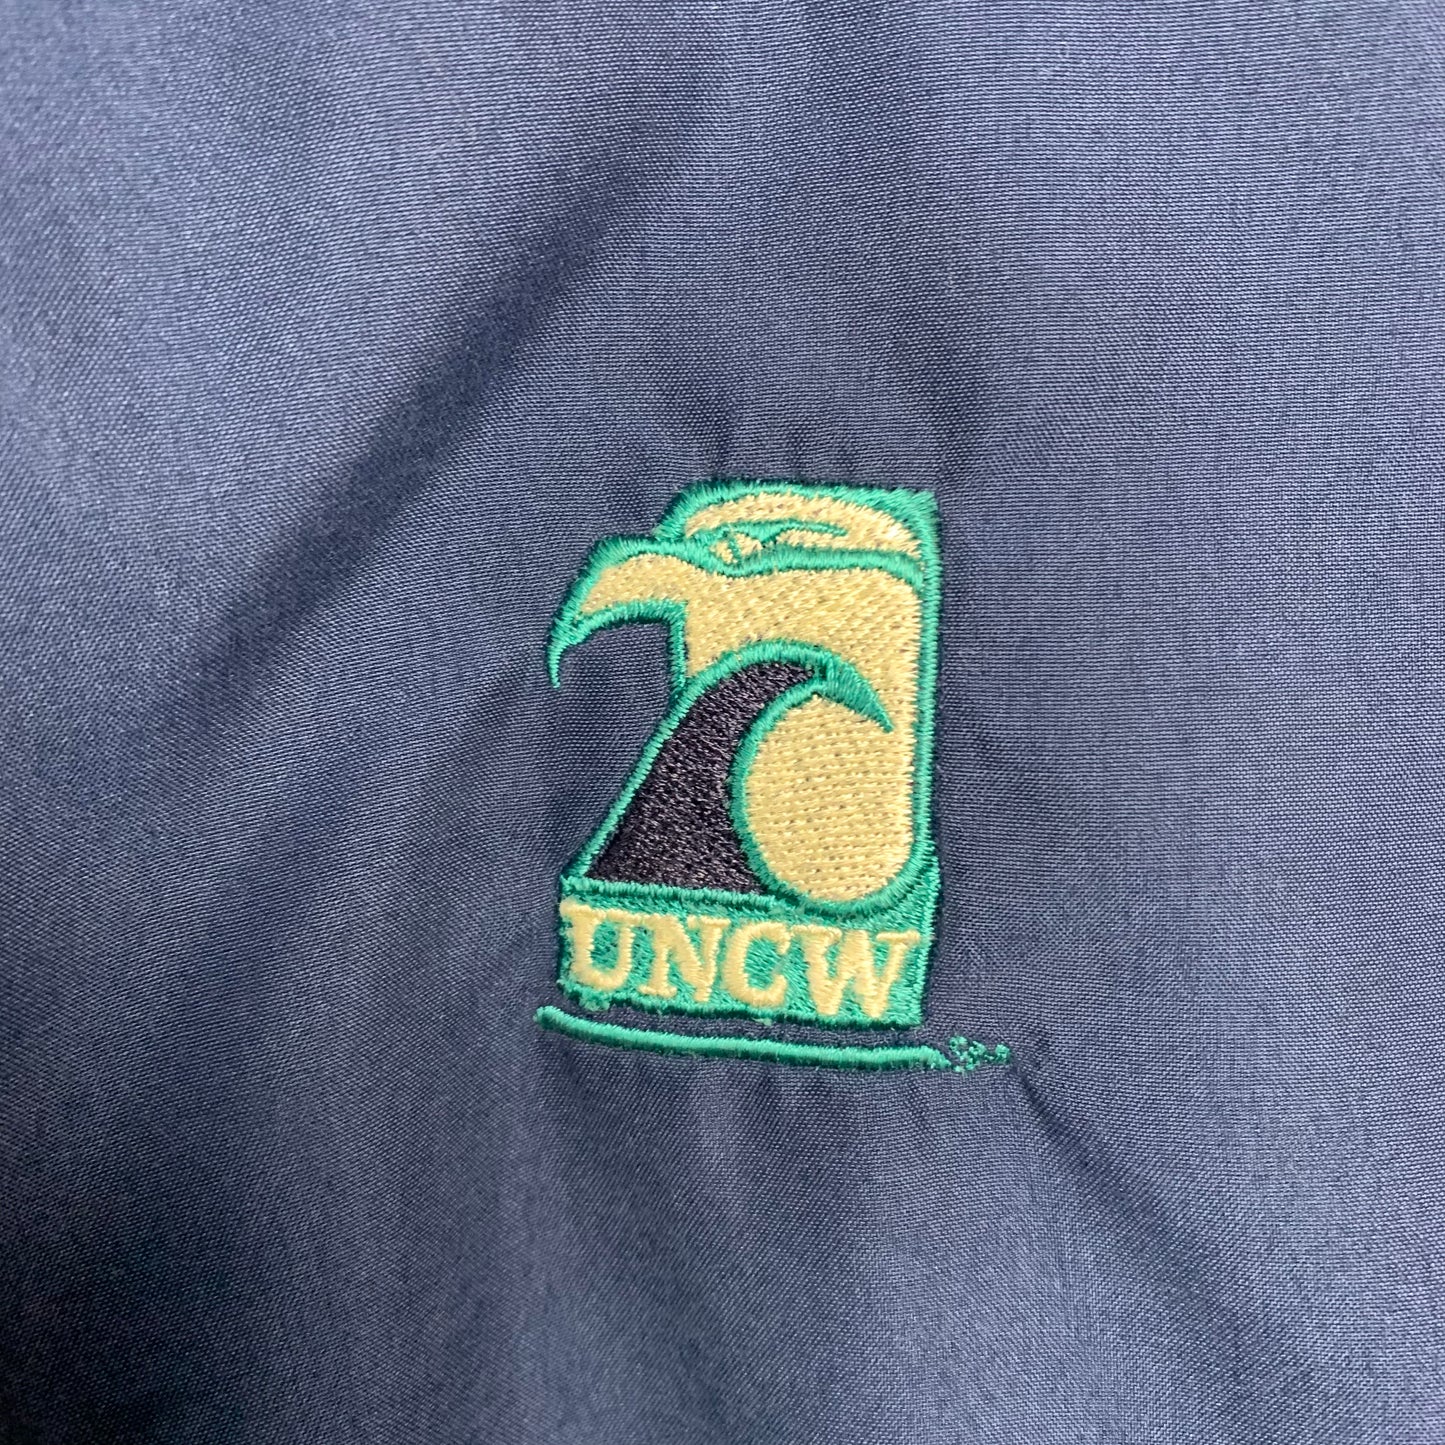 Vintage UNCW Vest Navy Blue Windbreaker Pullover Golf Large Made in the USA